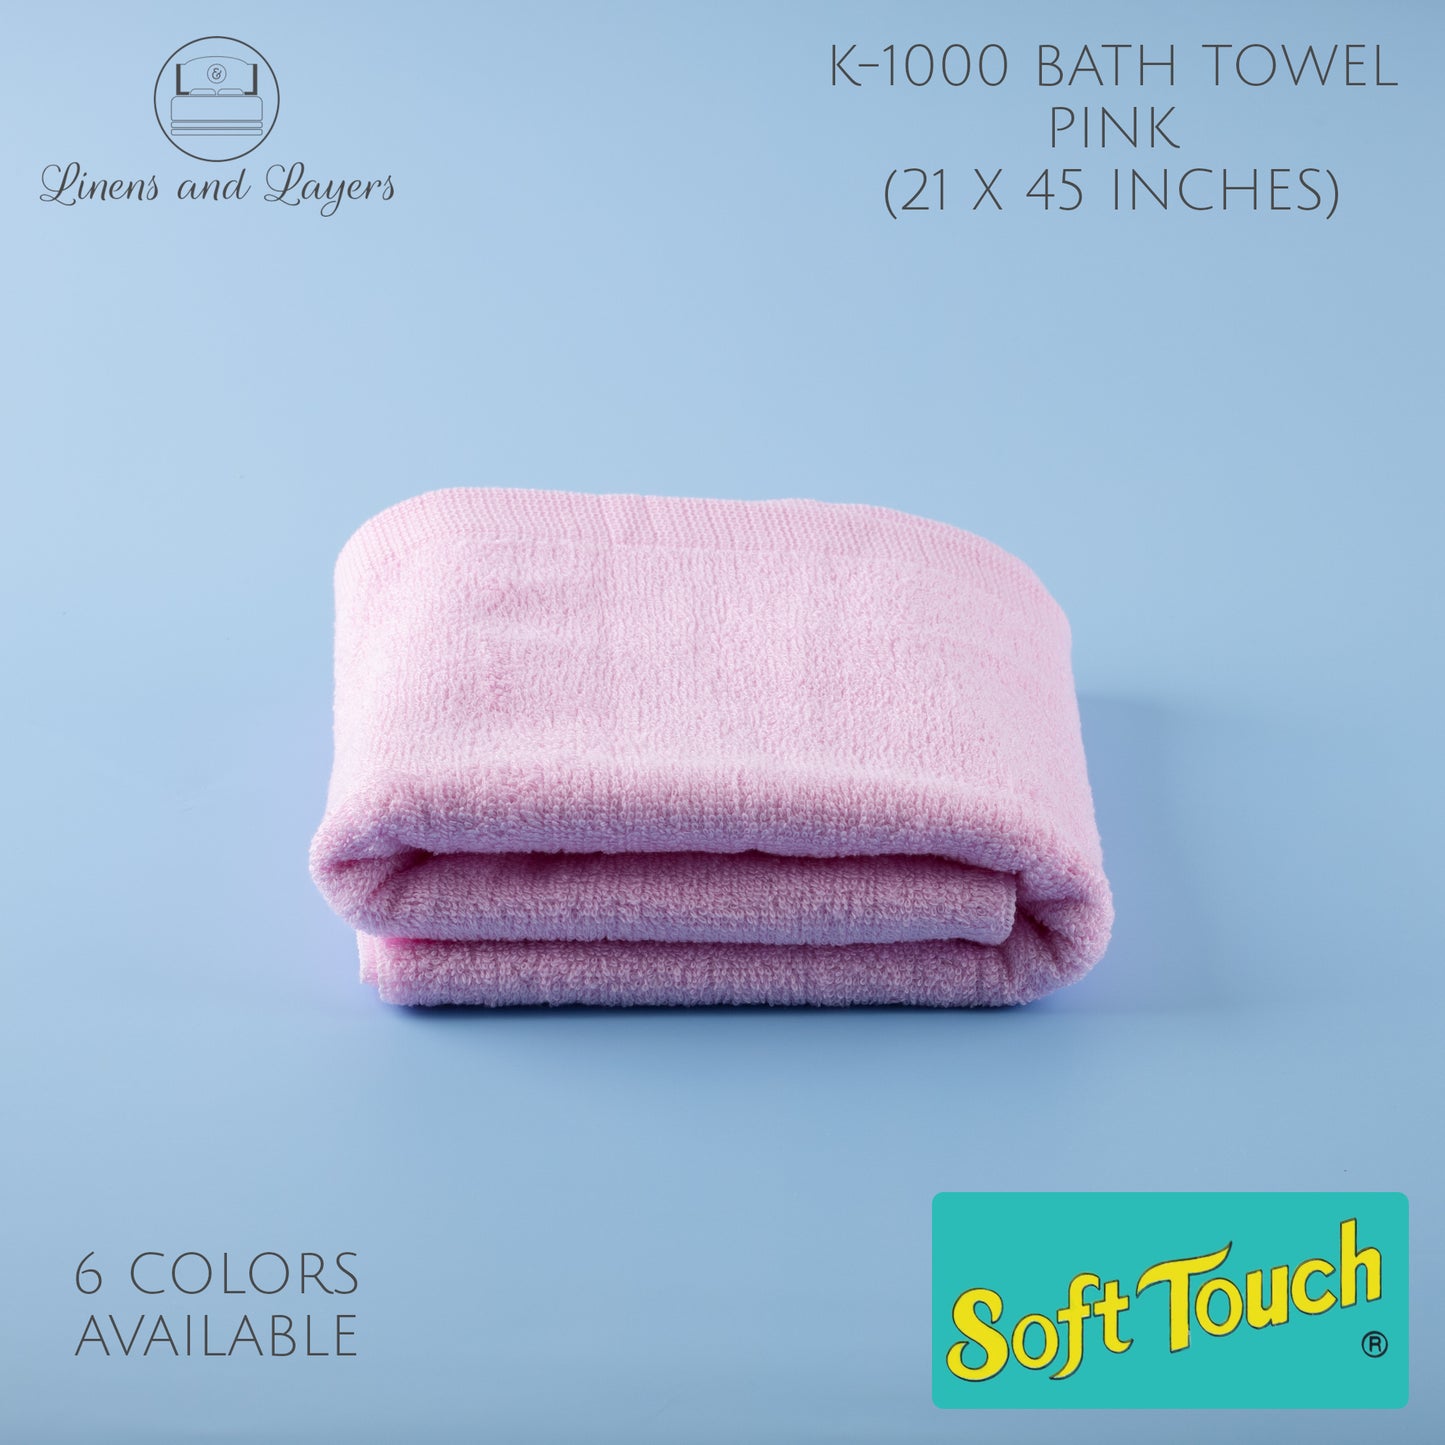 Soft Touch Bath Towel (295 GSM) -  K1000 Terrycloth - 21x45 inches